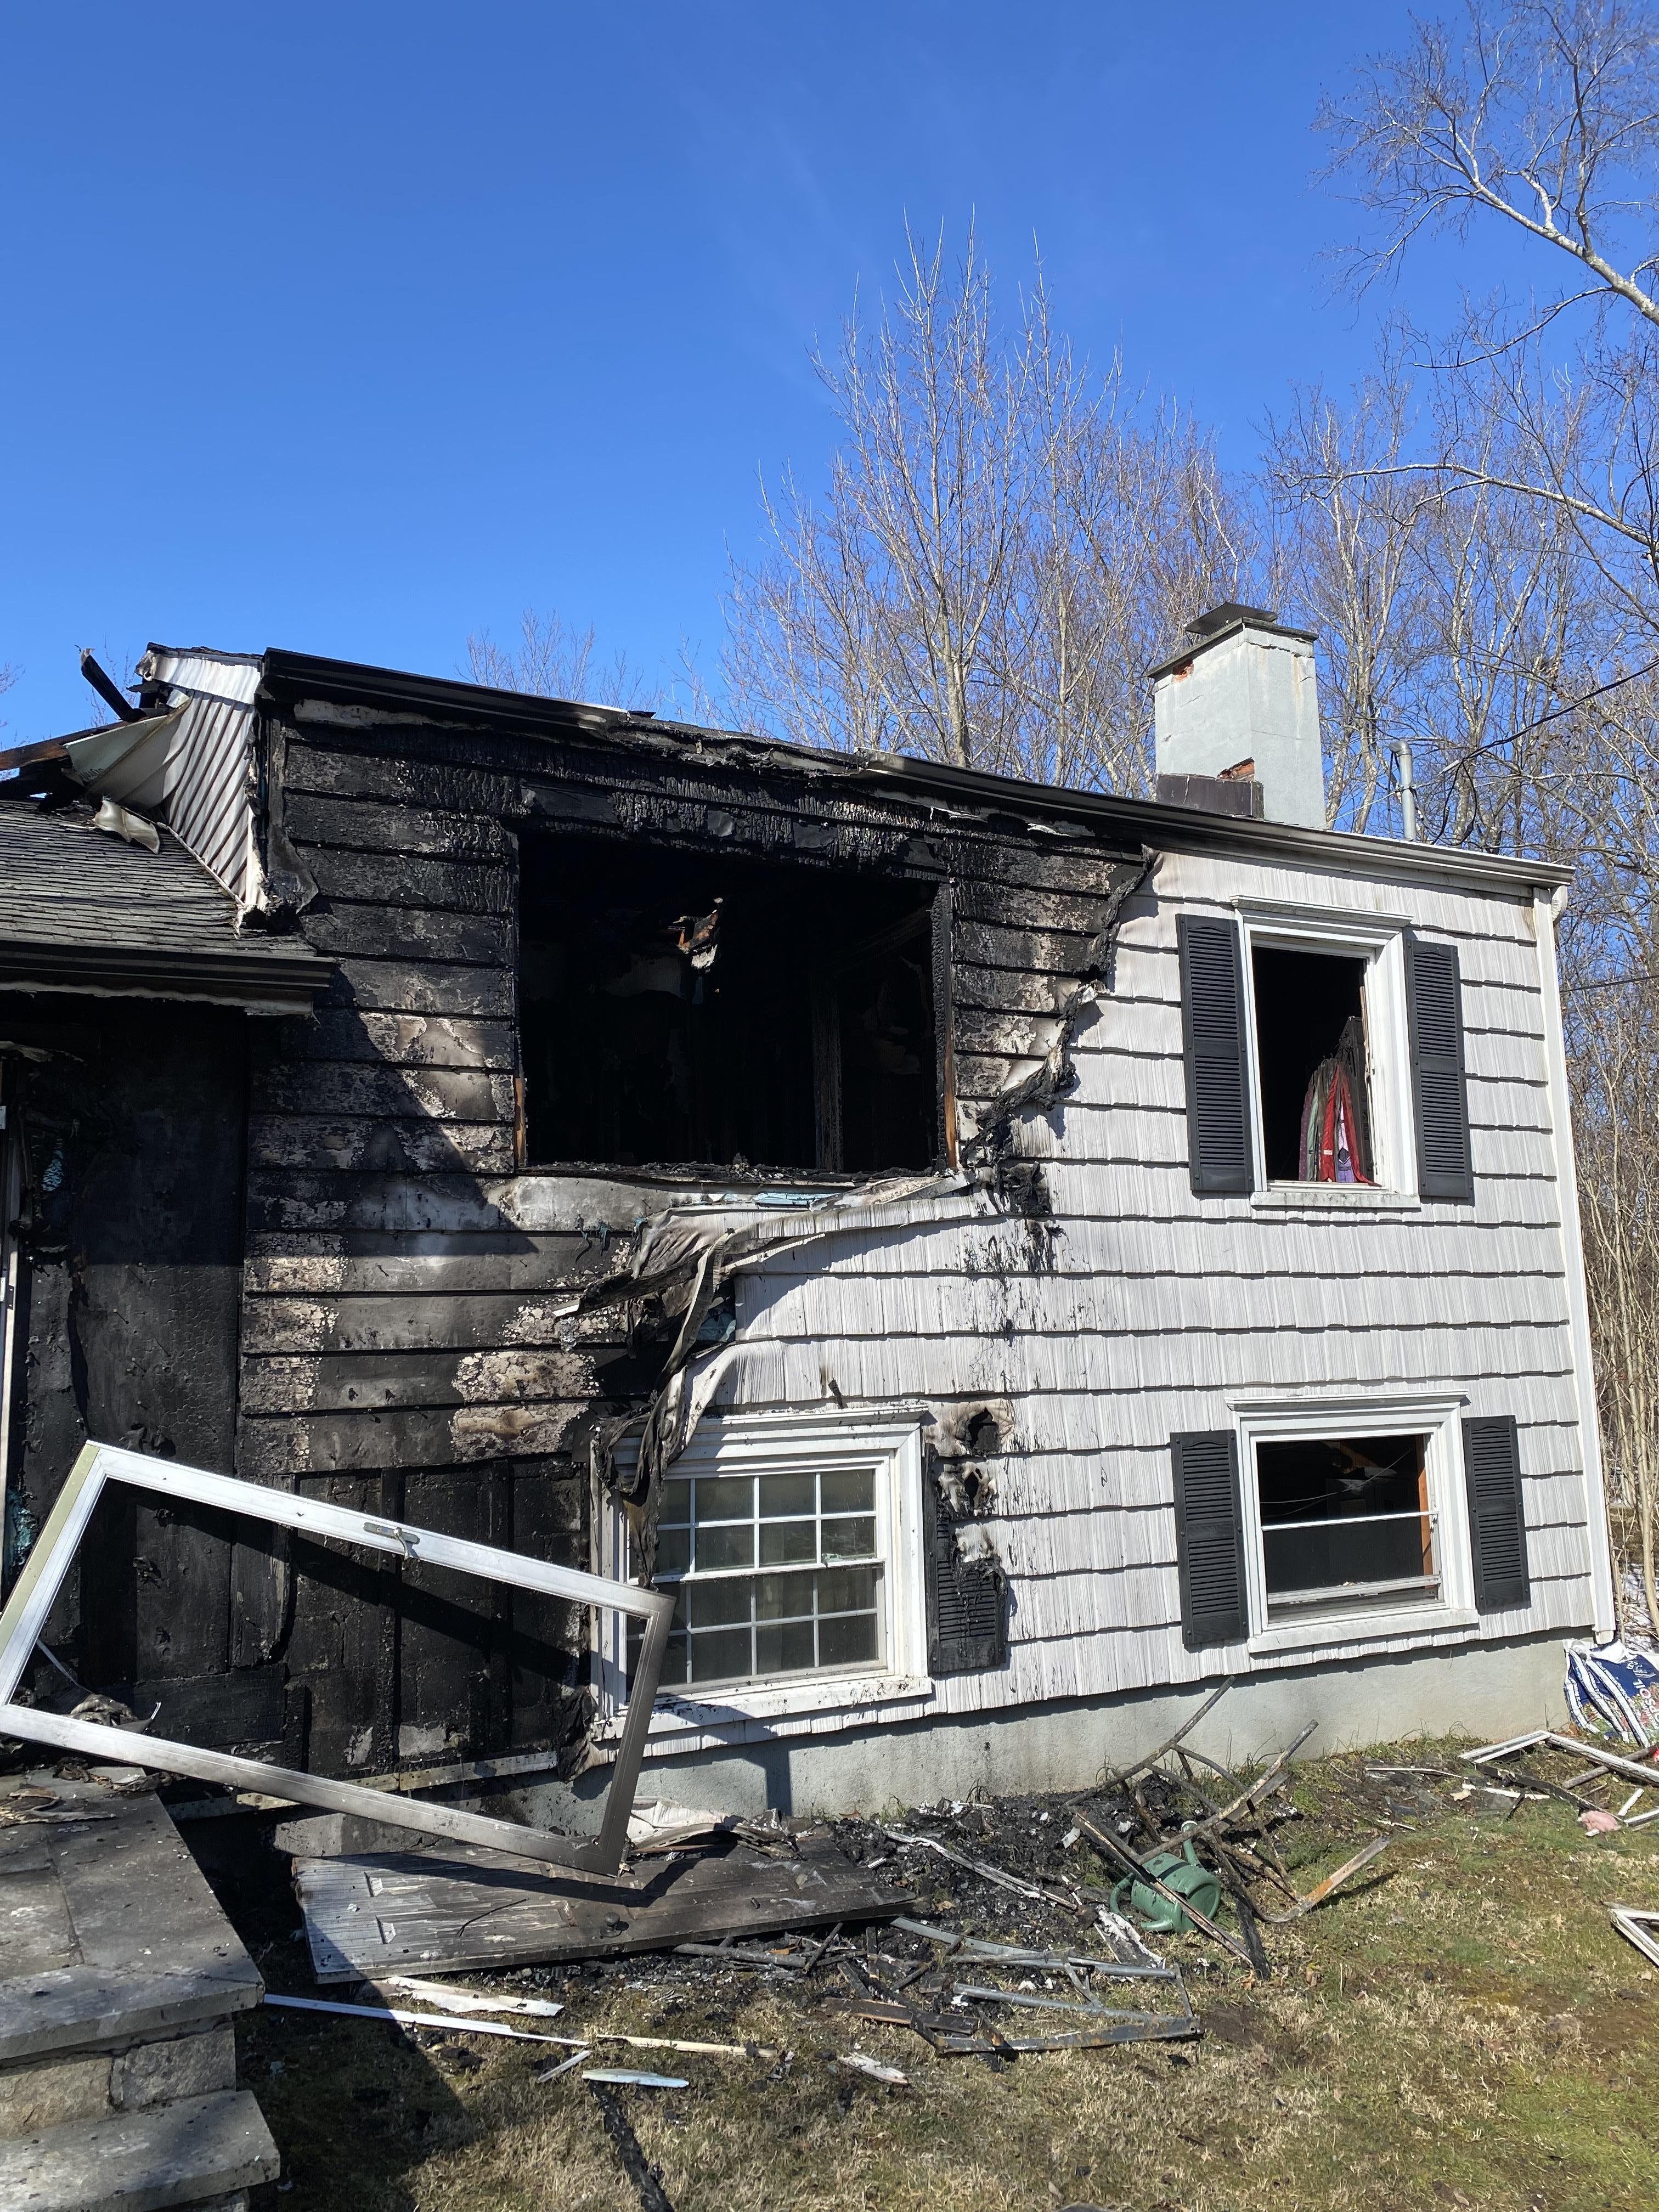 Fire damages home in Briarcliff Manor, NY